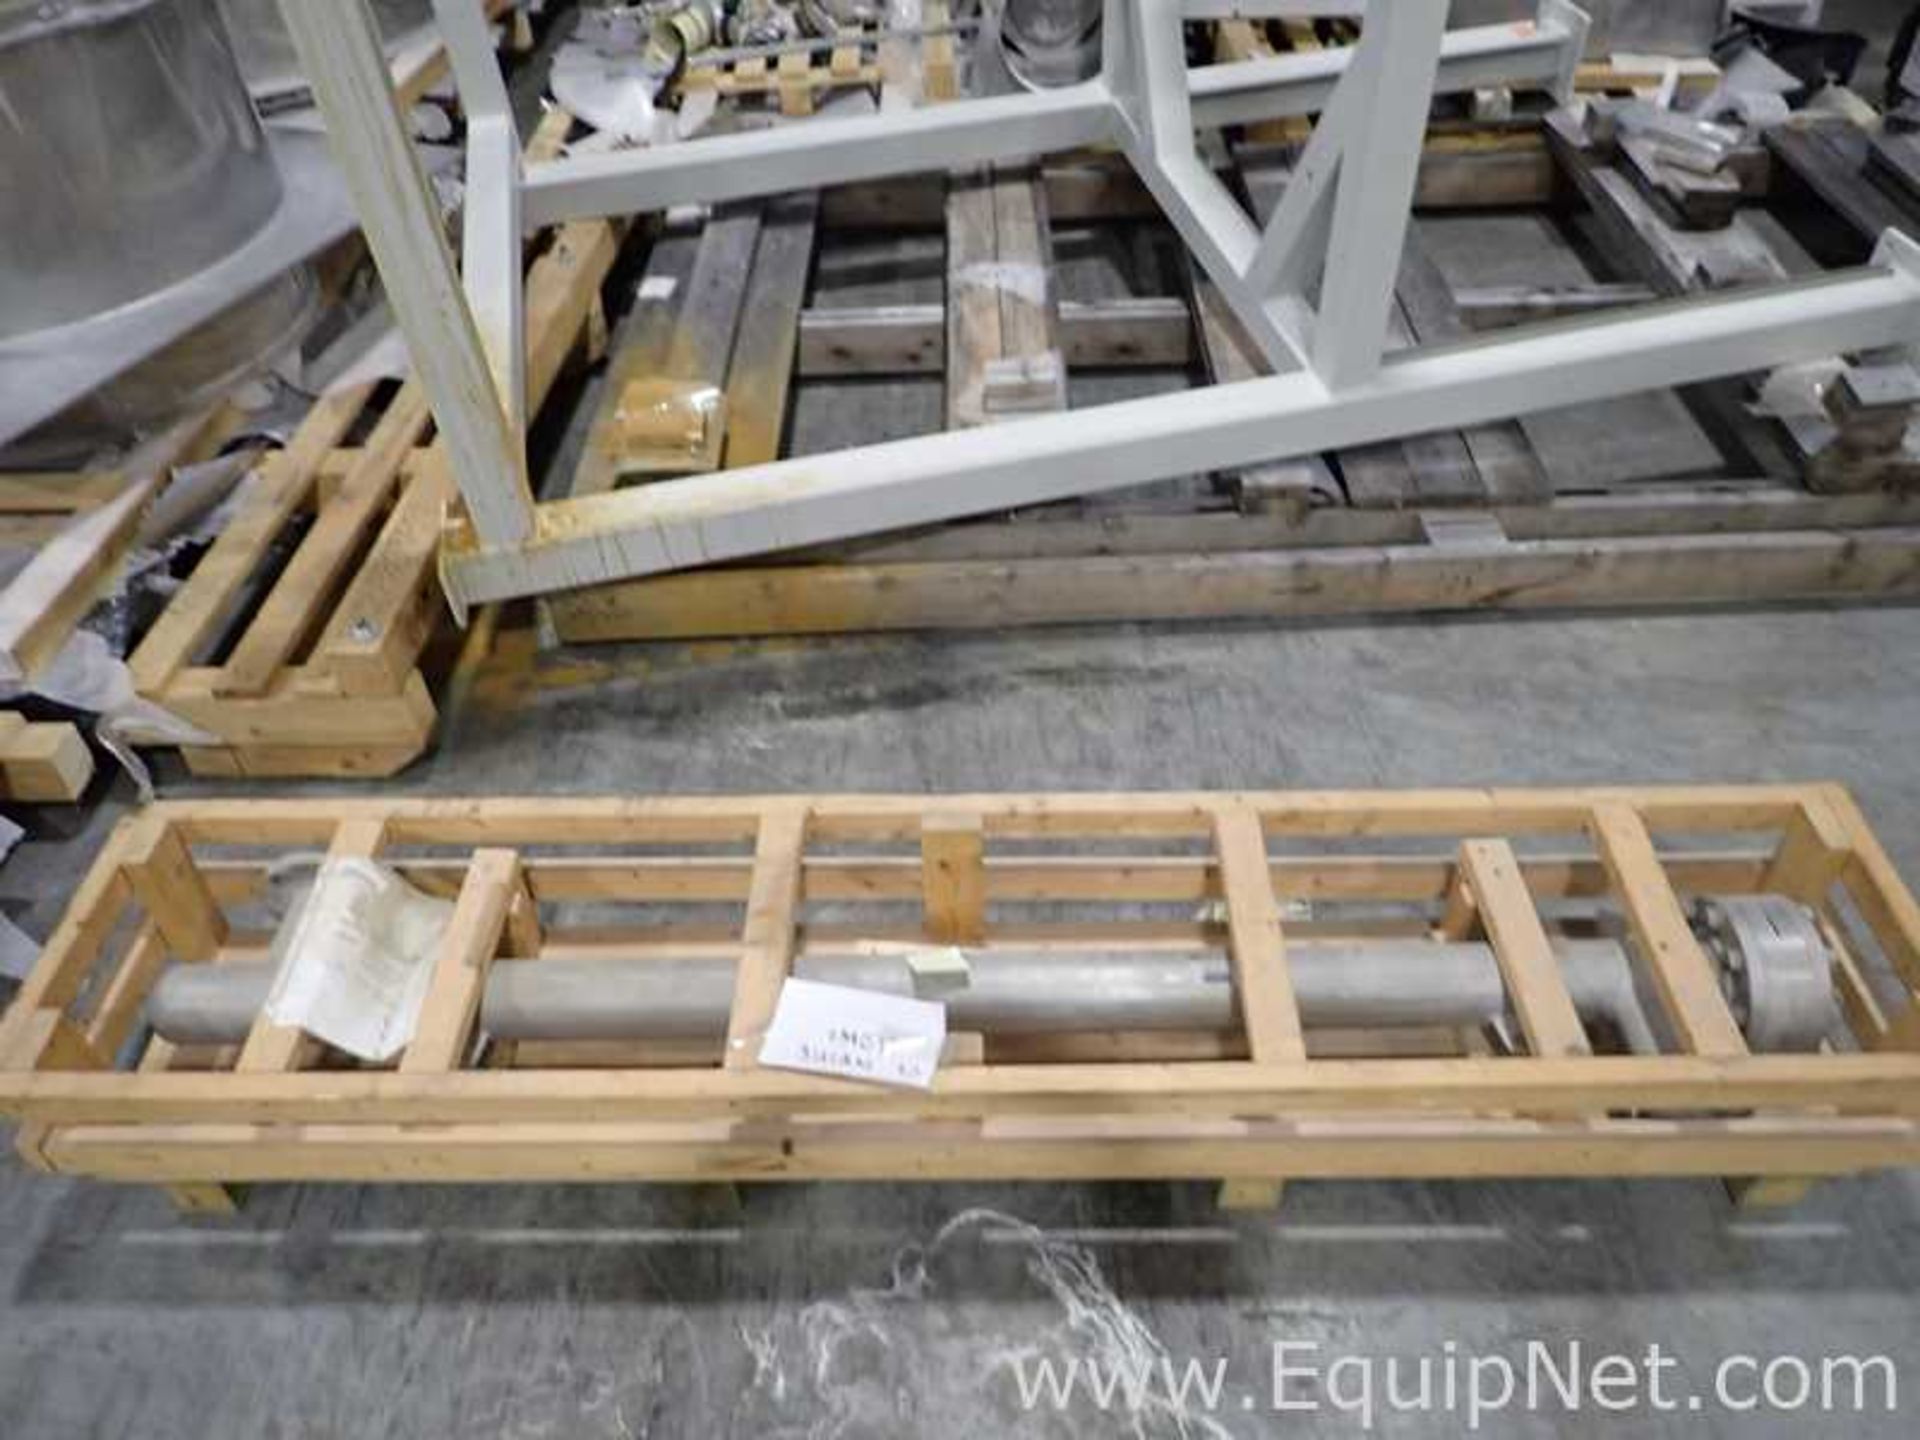 AZO Raw Material Production Equipment - Image 13 of 21